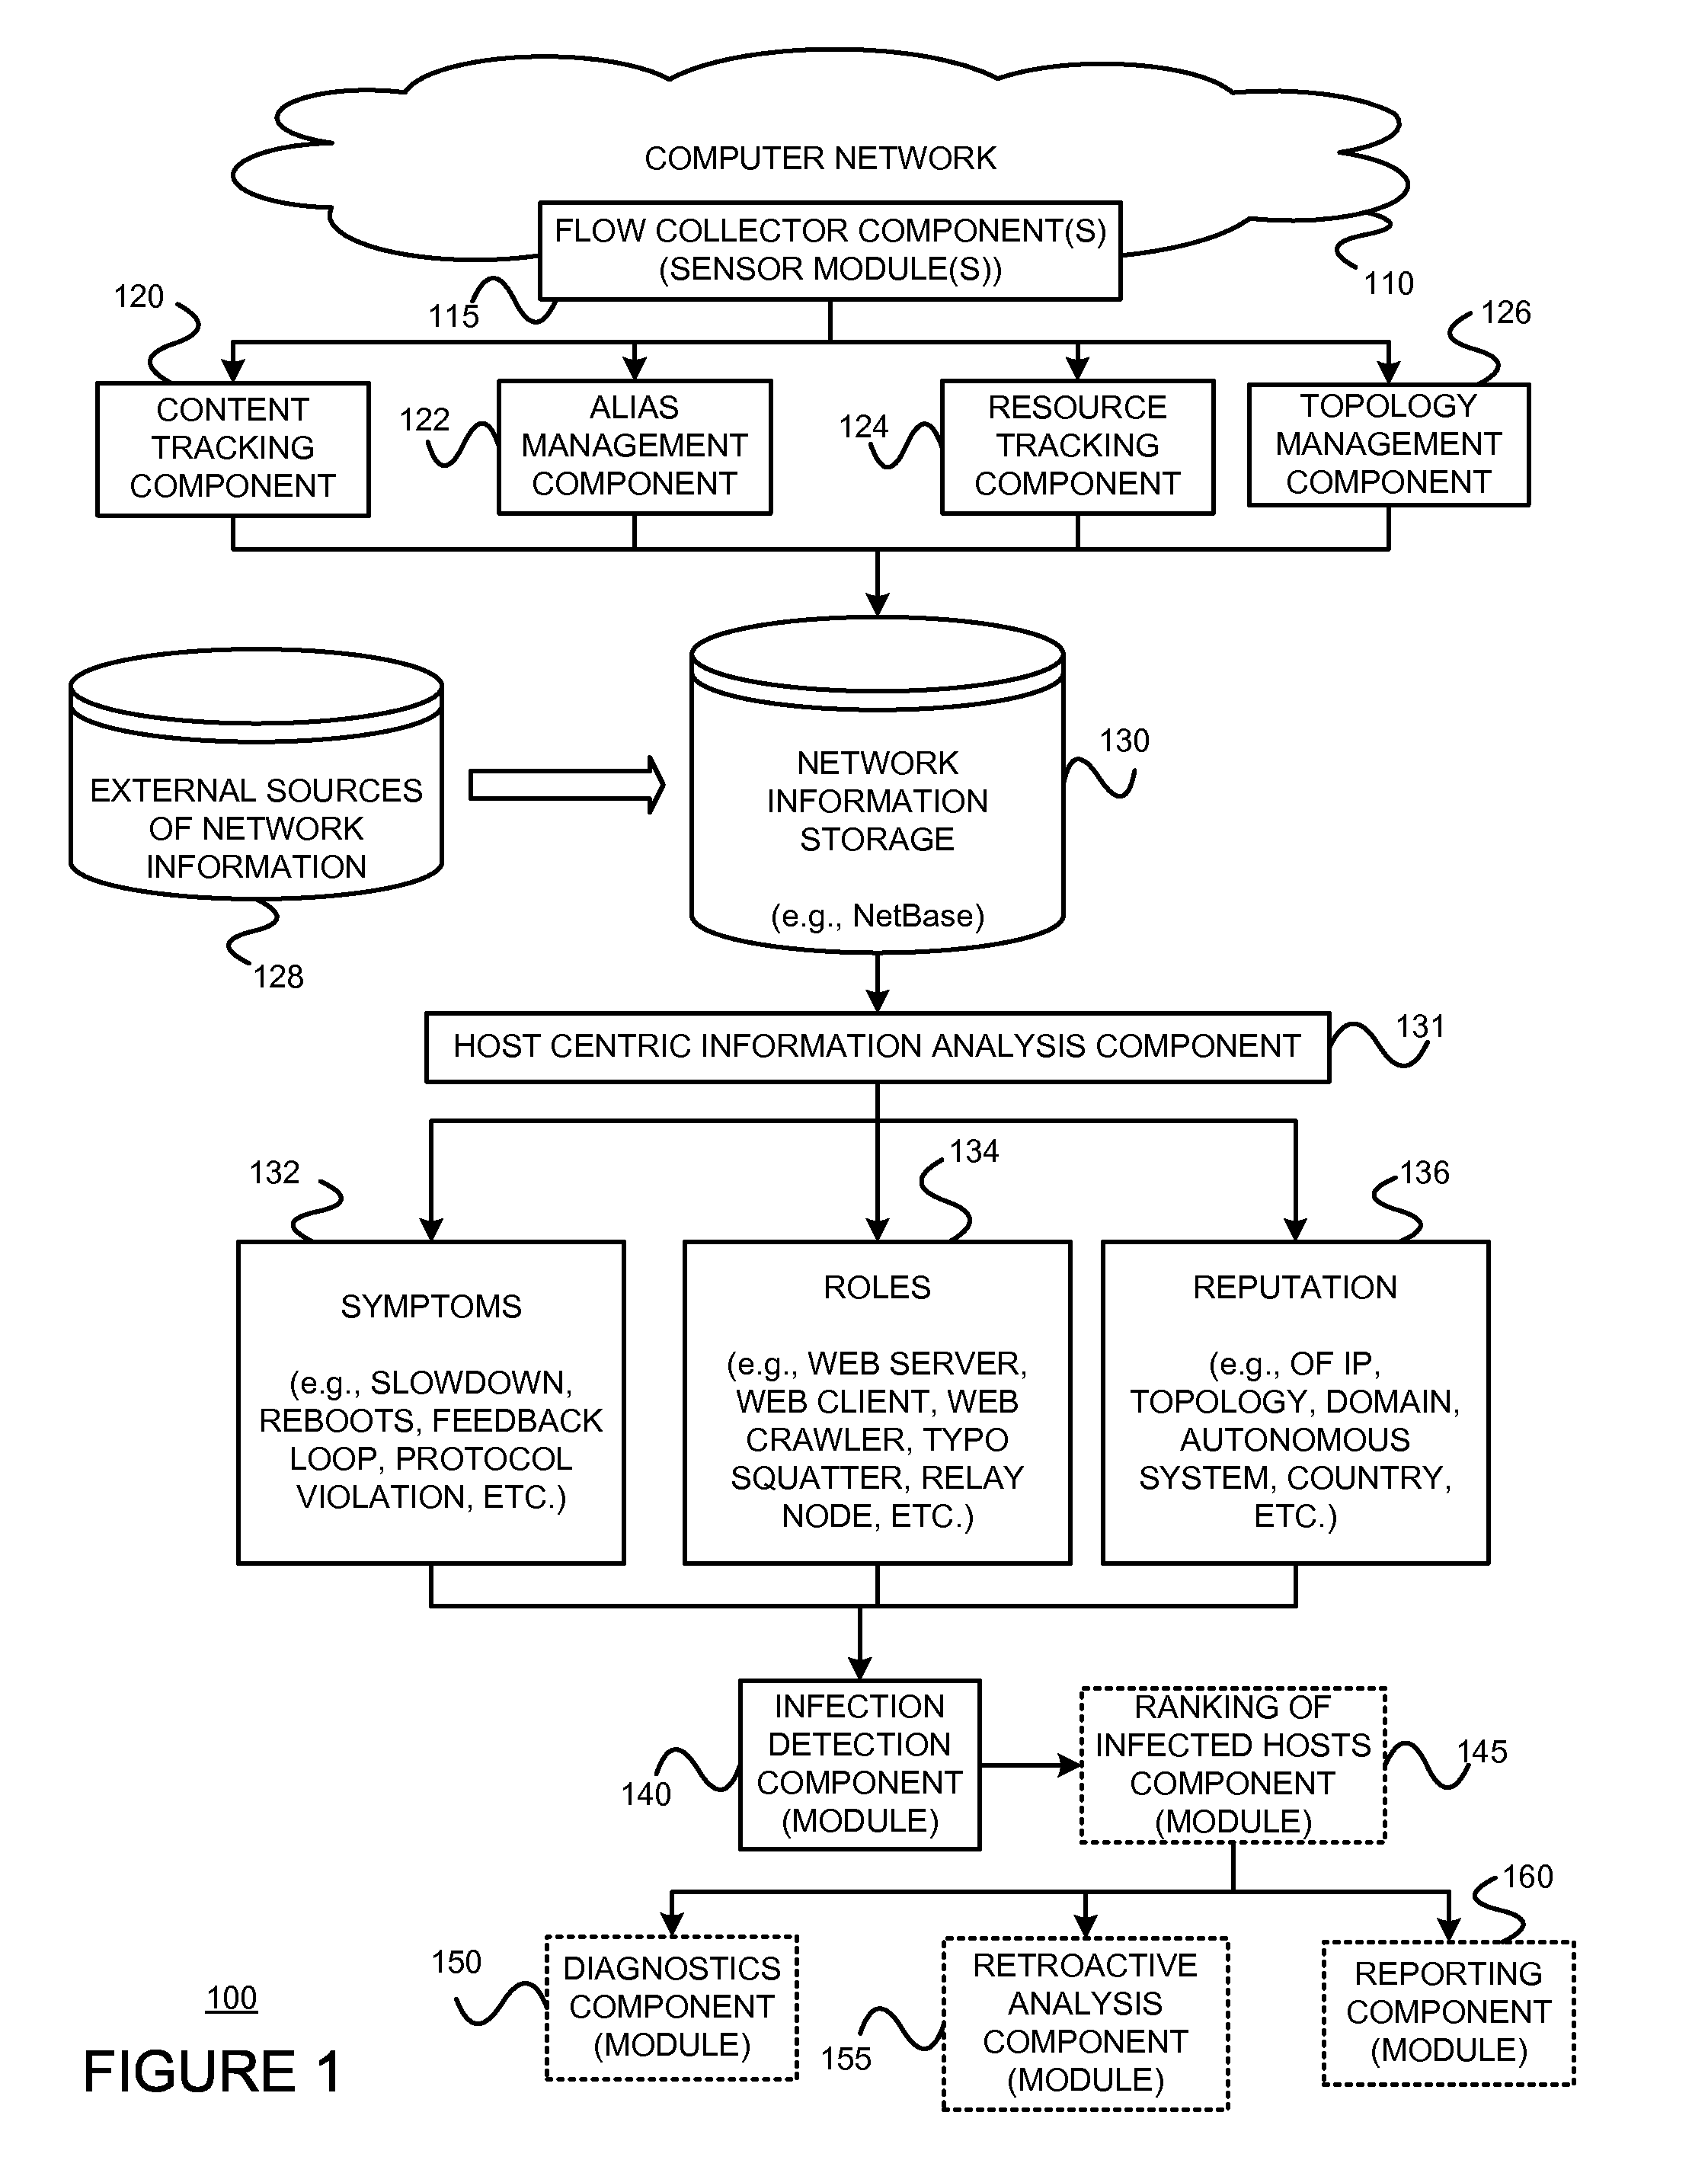 Using host symptoms, host roles, and/or host reputation for detection of host infection